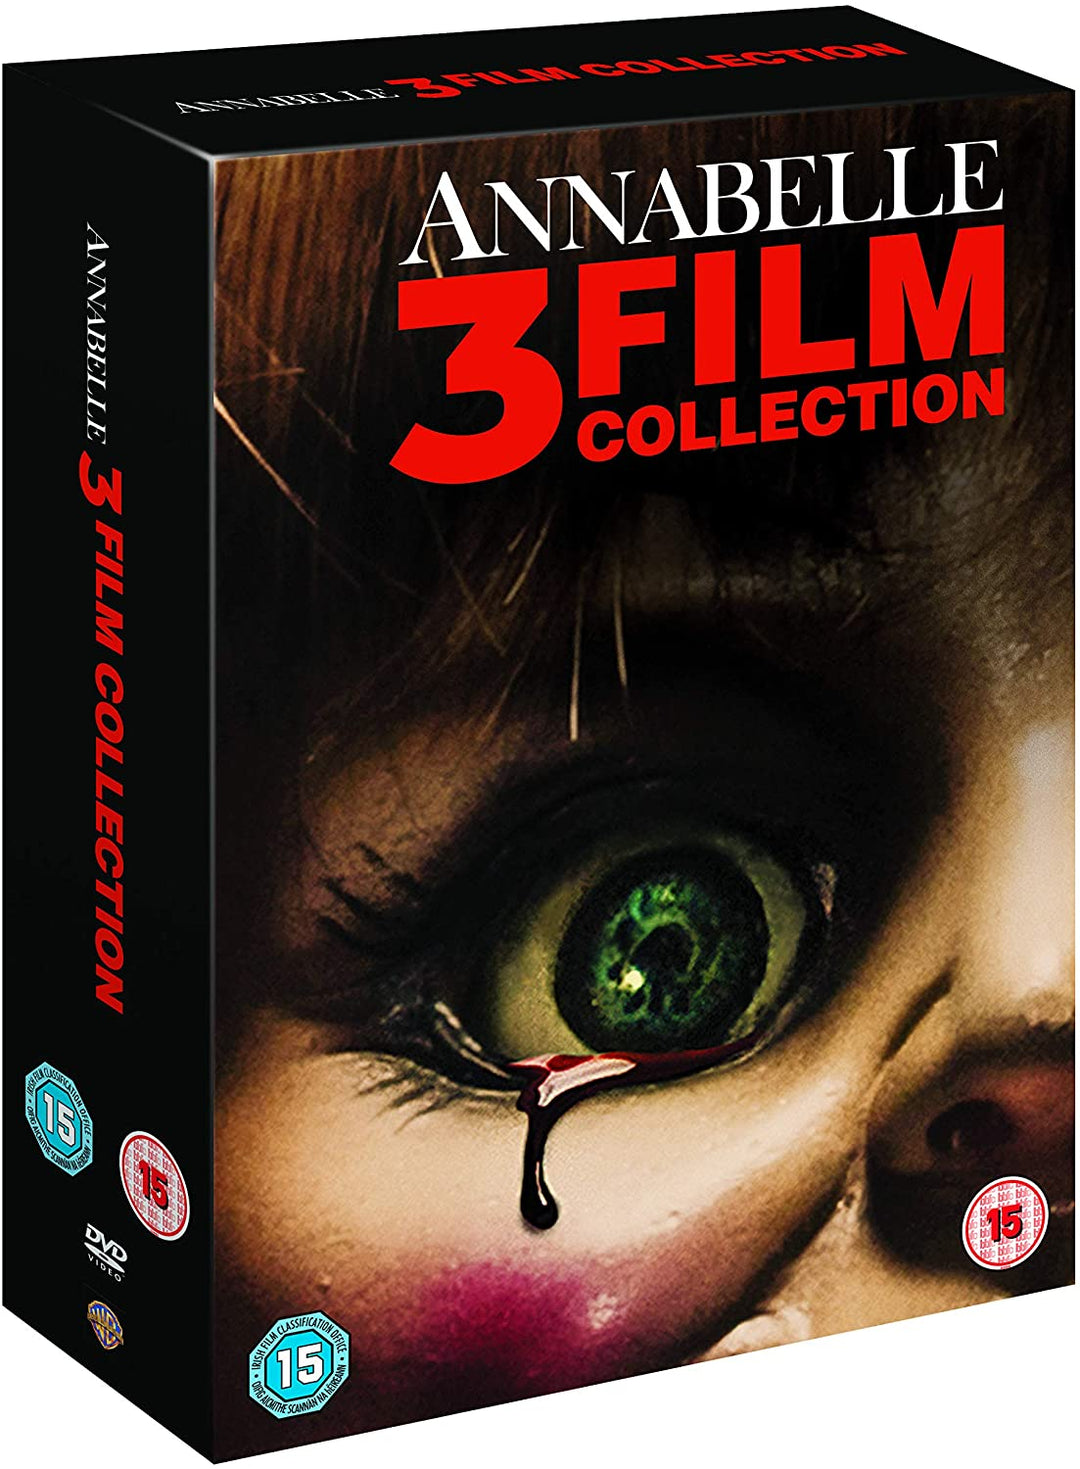 Annabelle [3 Film Collection] [2019]